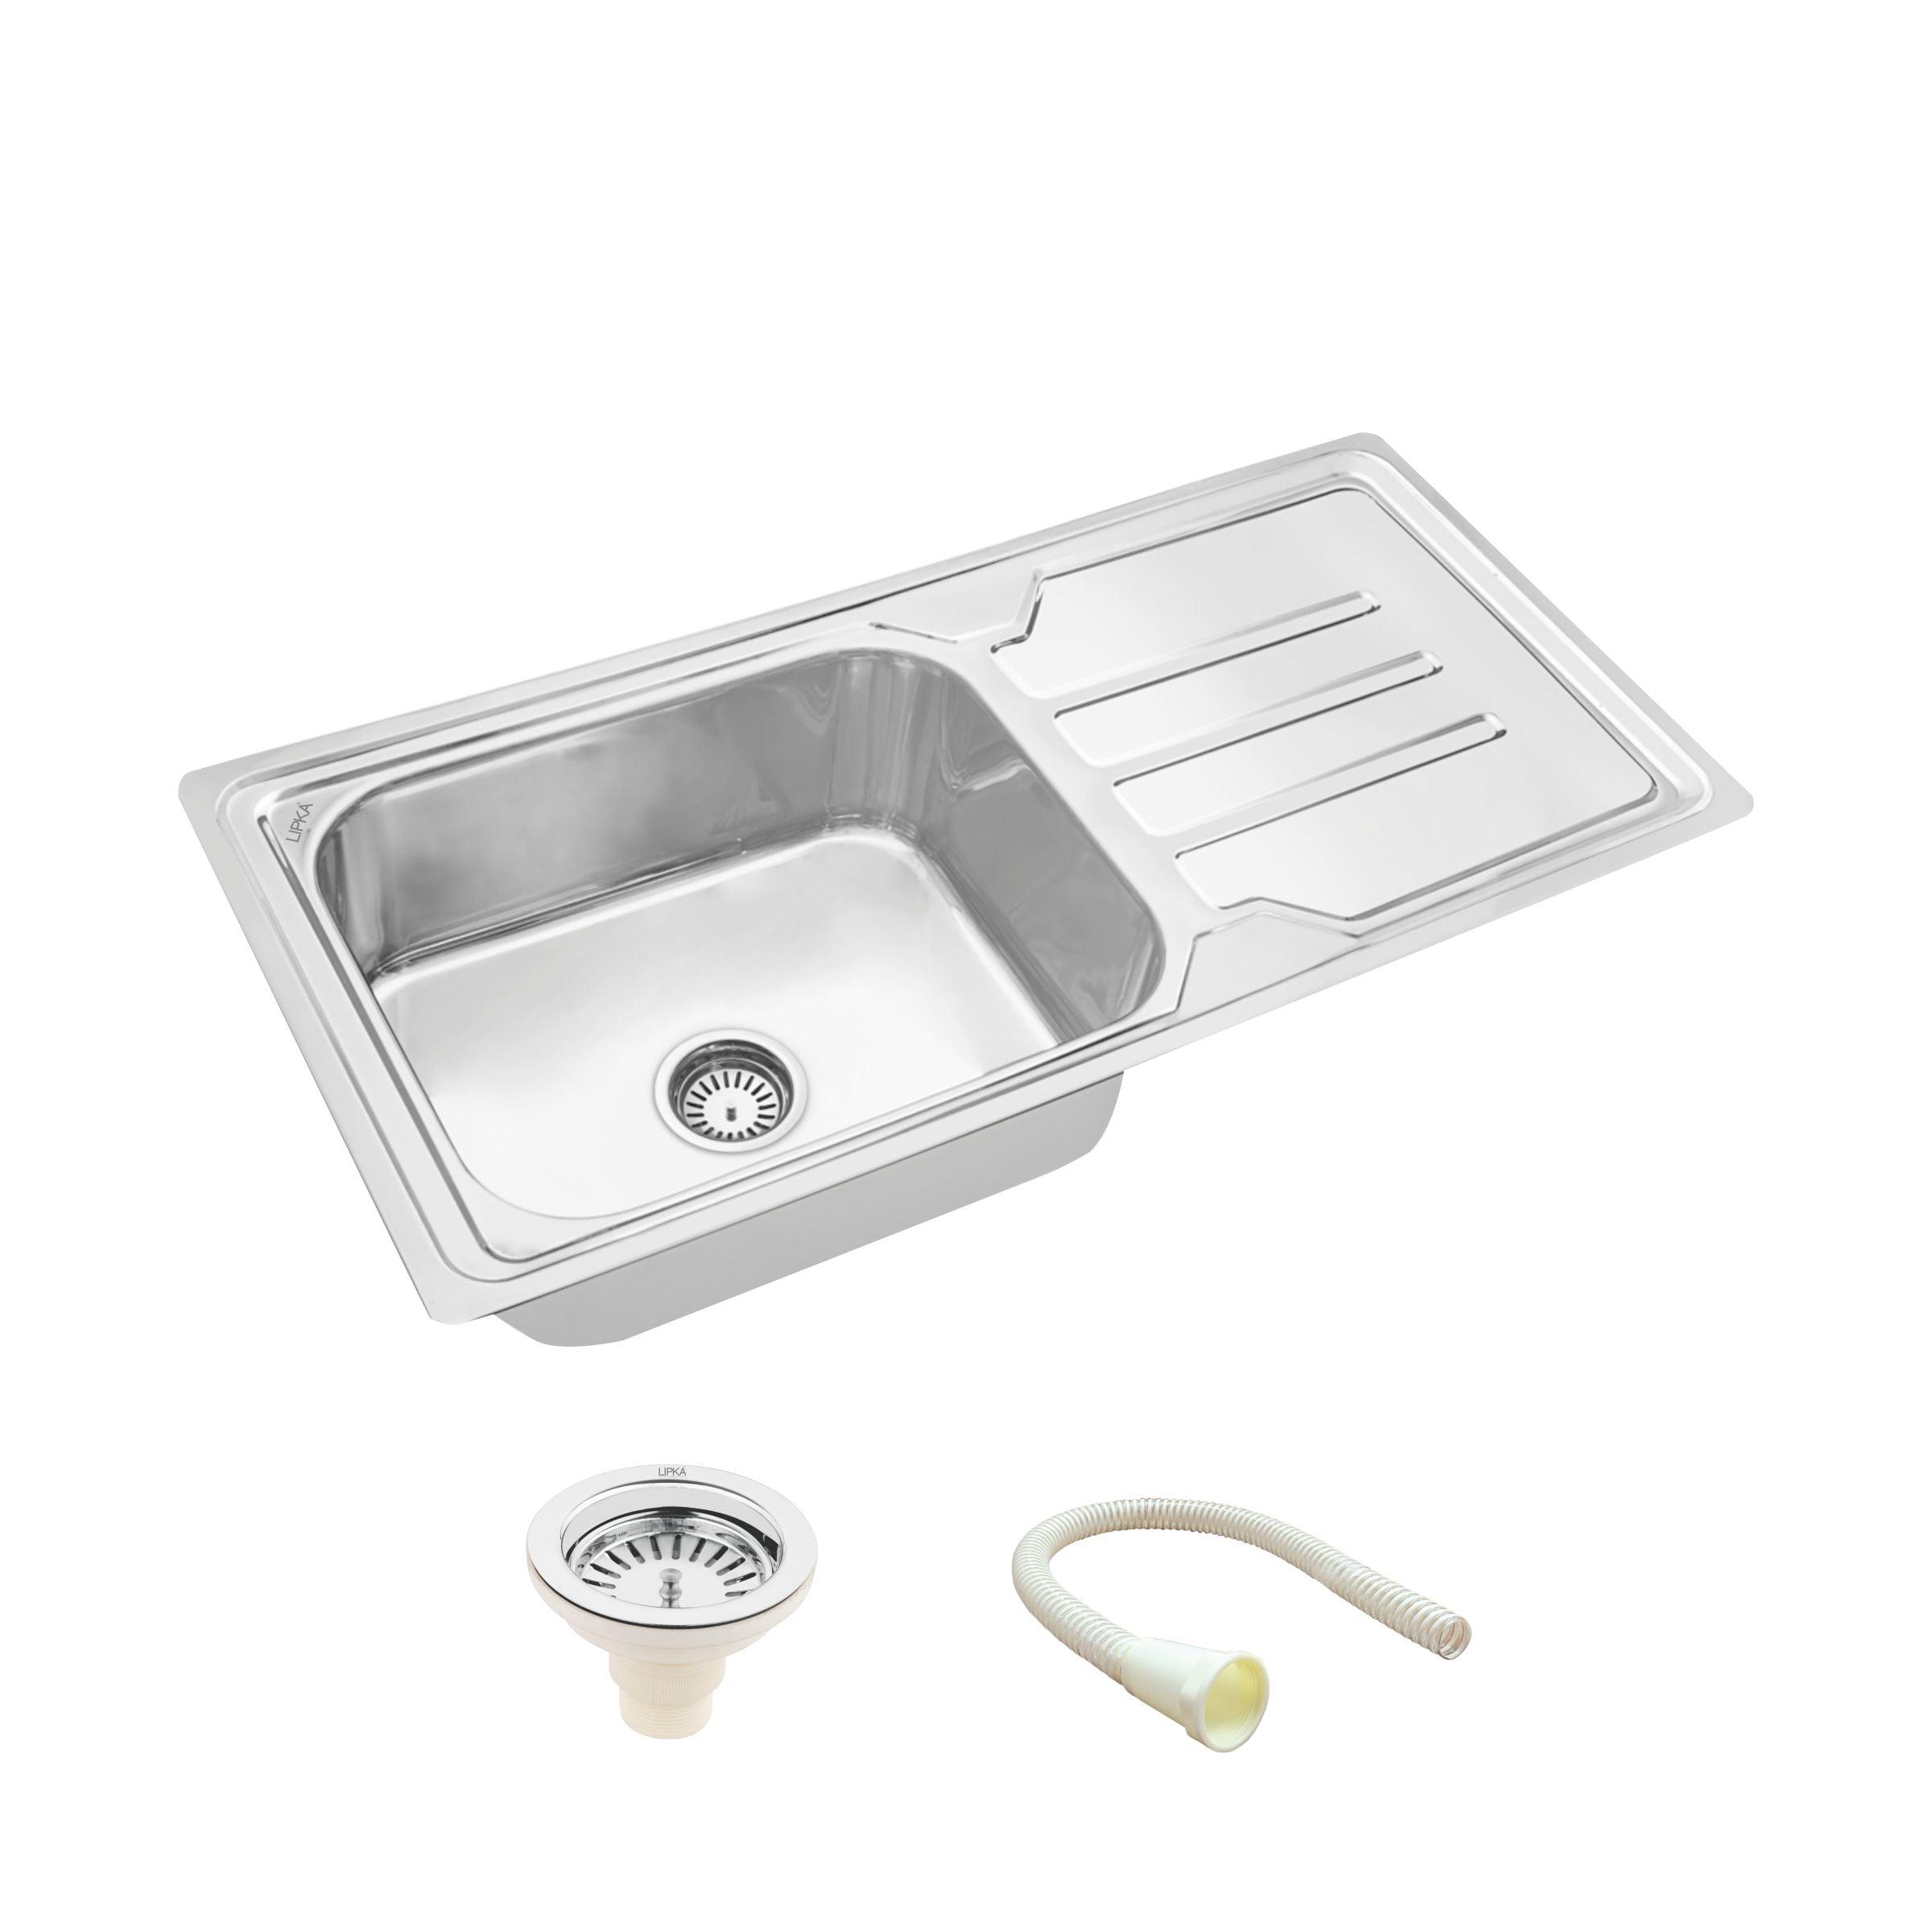 Square Single Bowl Kitchen Sink with Drainboard (42 x 20 x 9 Inches) - LIPKA